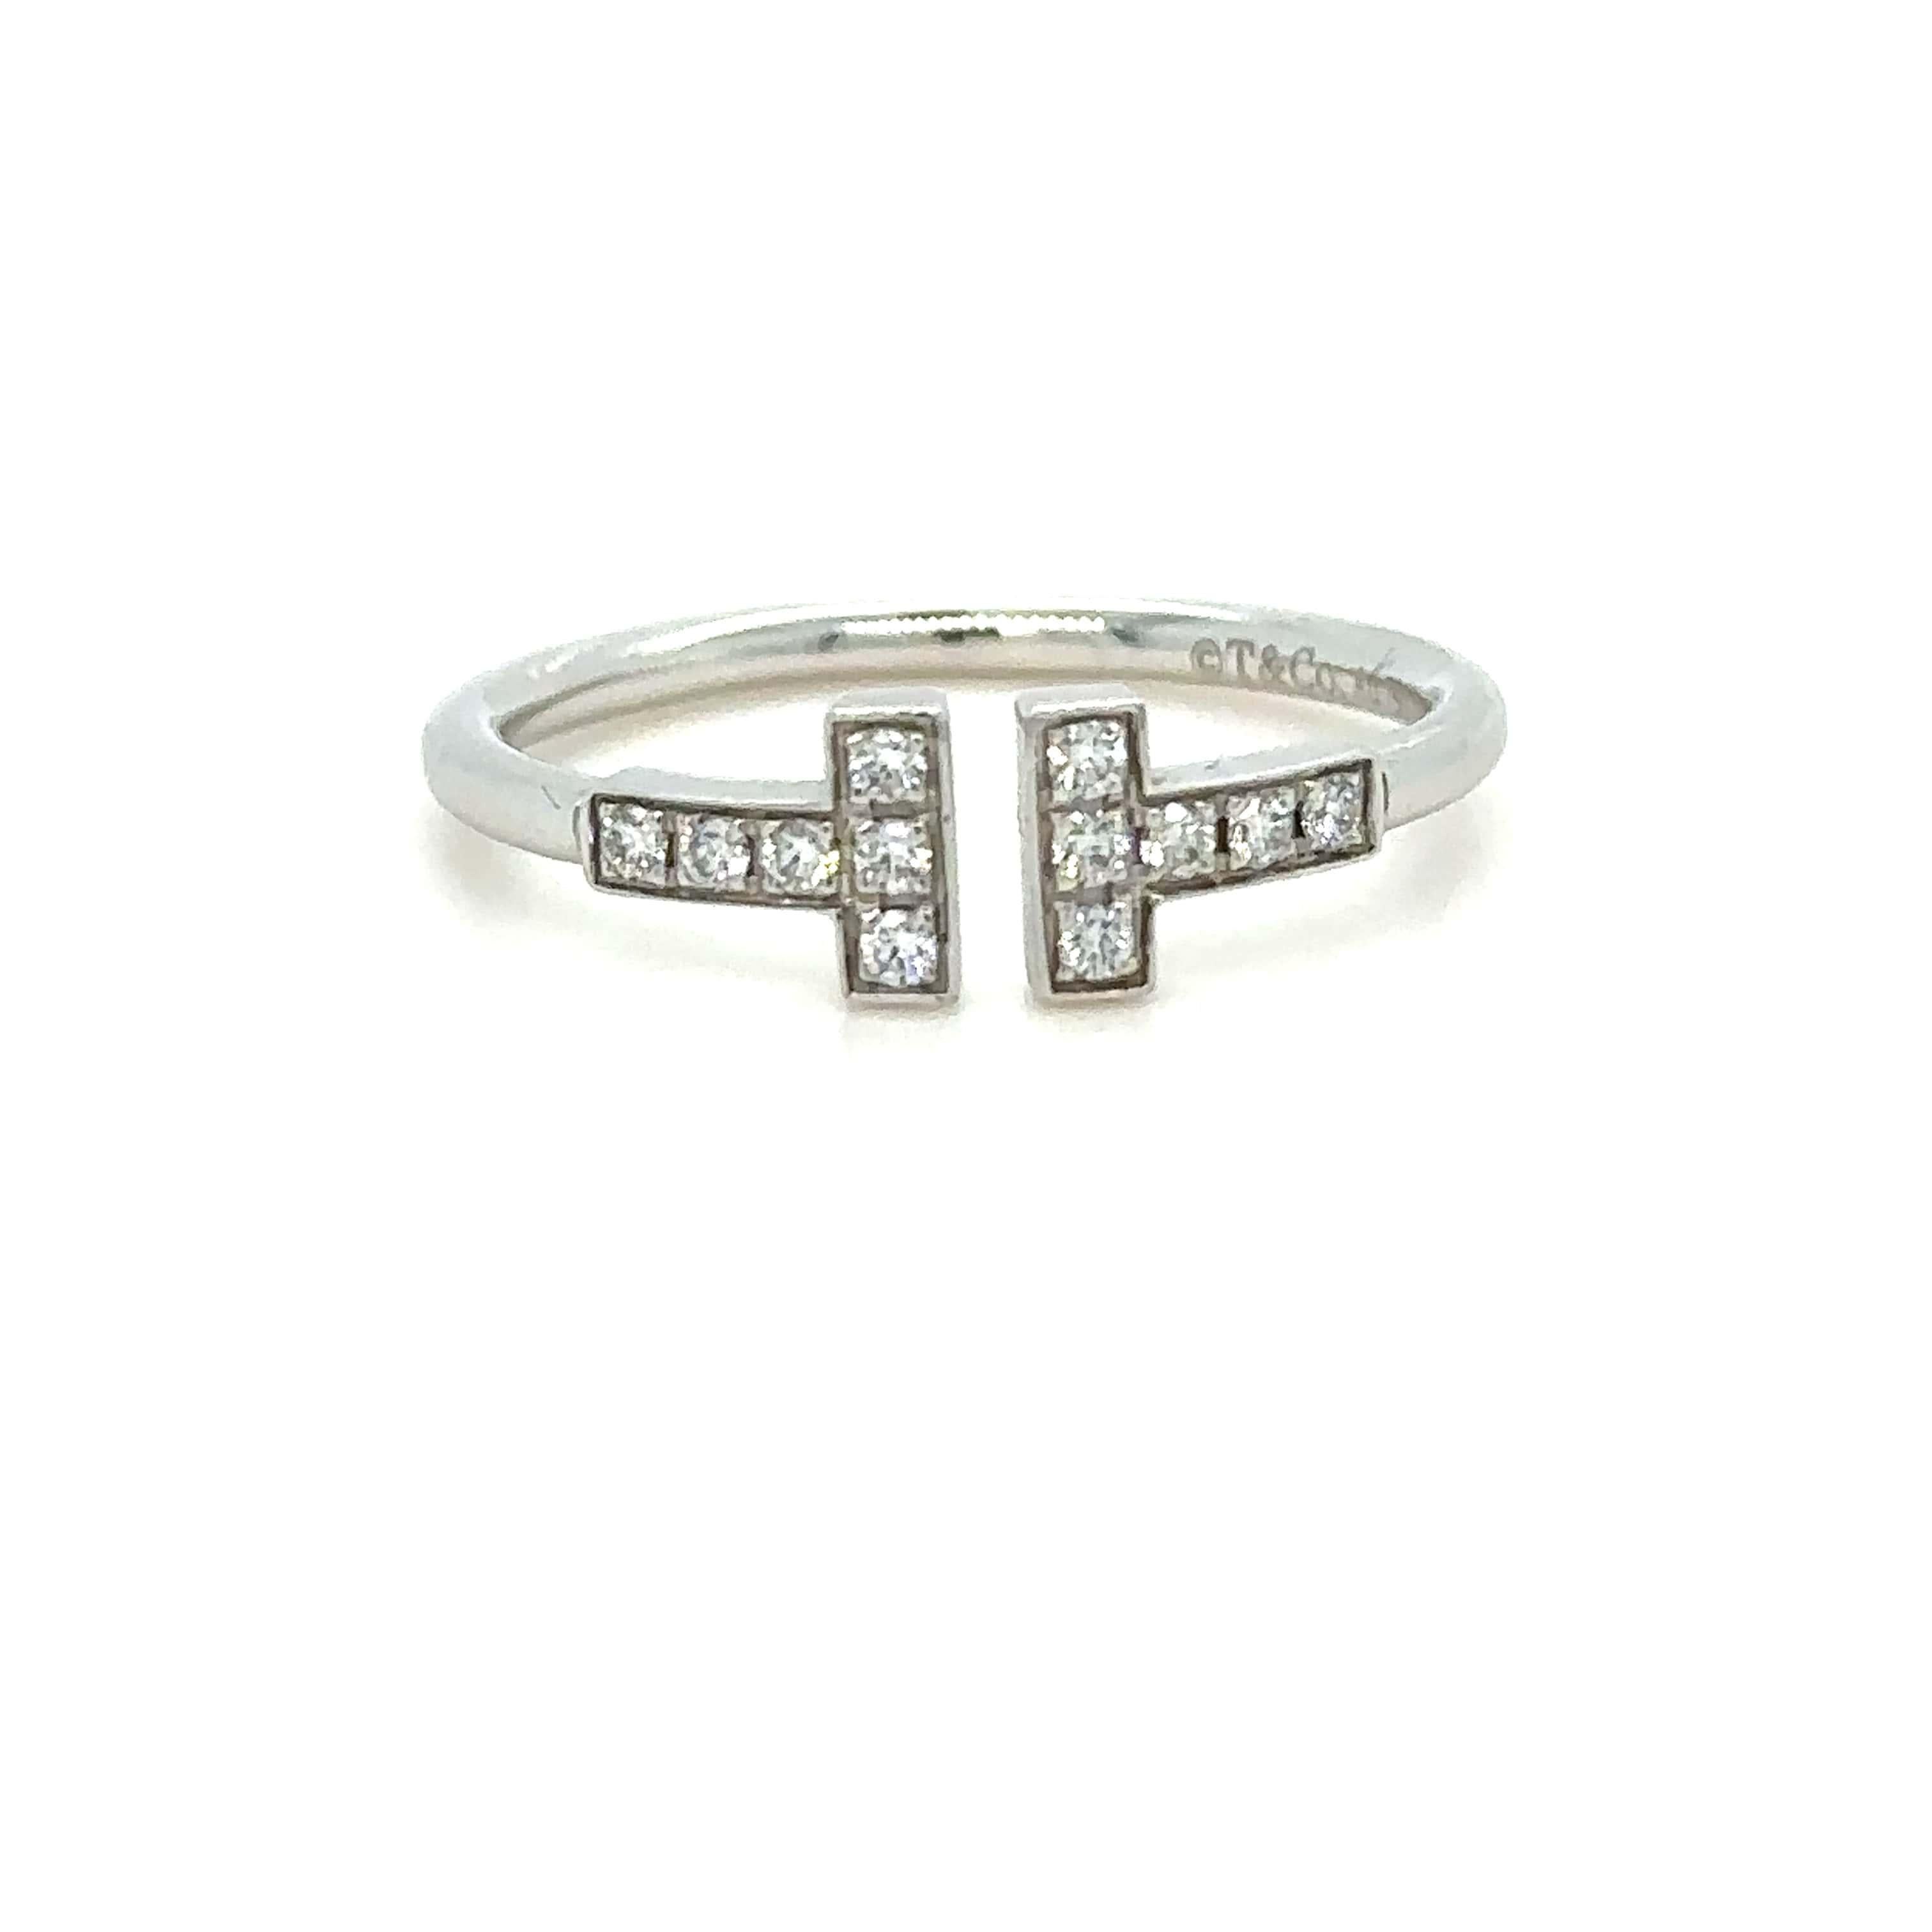 Unique features: 

Tiffany T Diamond Wire Ring in 18k White Gold with round brilliant diamonds.

Metal: 18ct White Gold
Carat: 0.13ct
Colour: N/A
Clarity:  N/A
Cut: Round Brilliant
Weight: N/A
Engravings/Markings: Au750 Italy

Size/Measurement: Ring